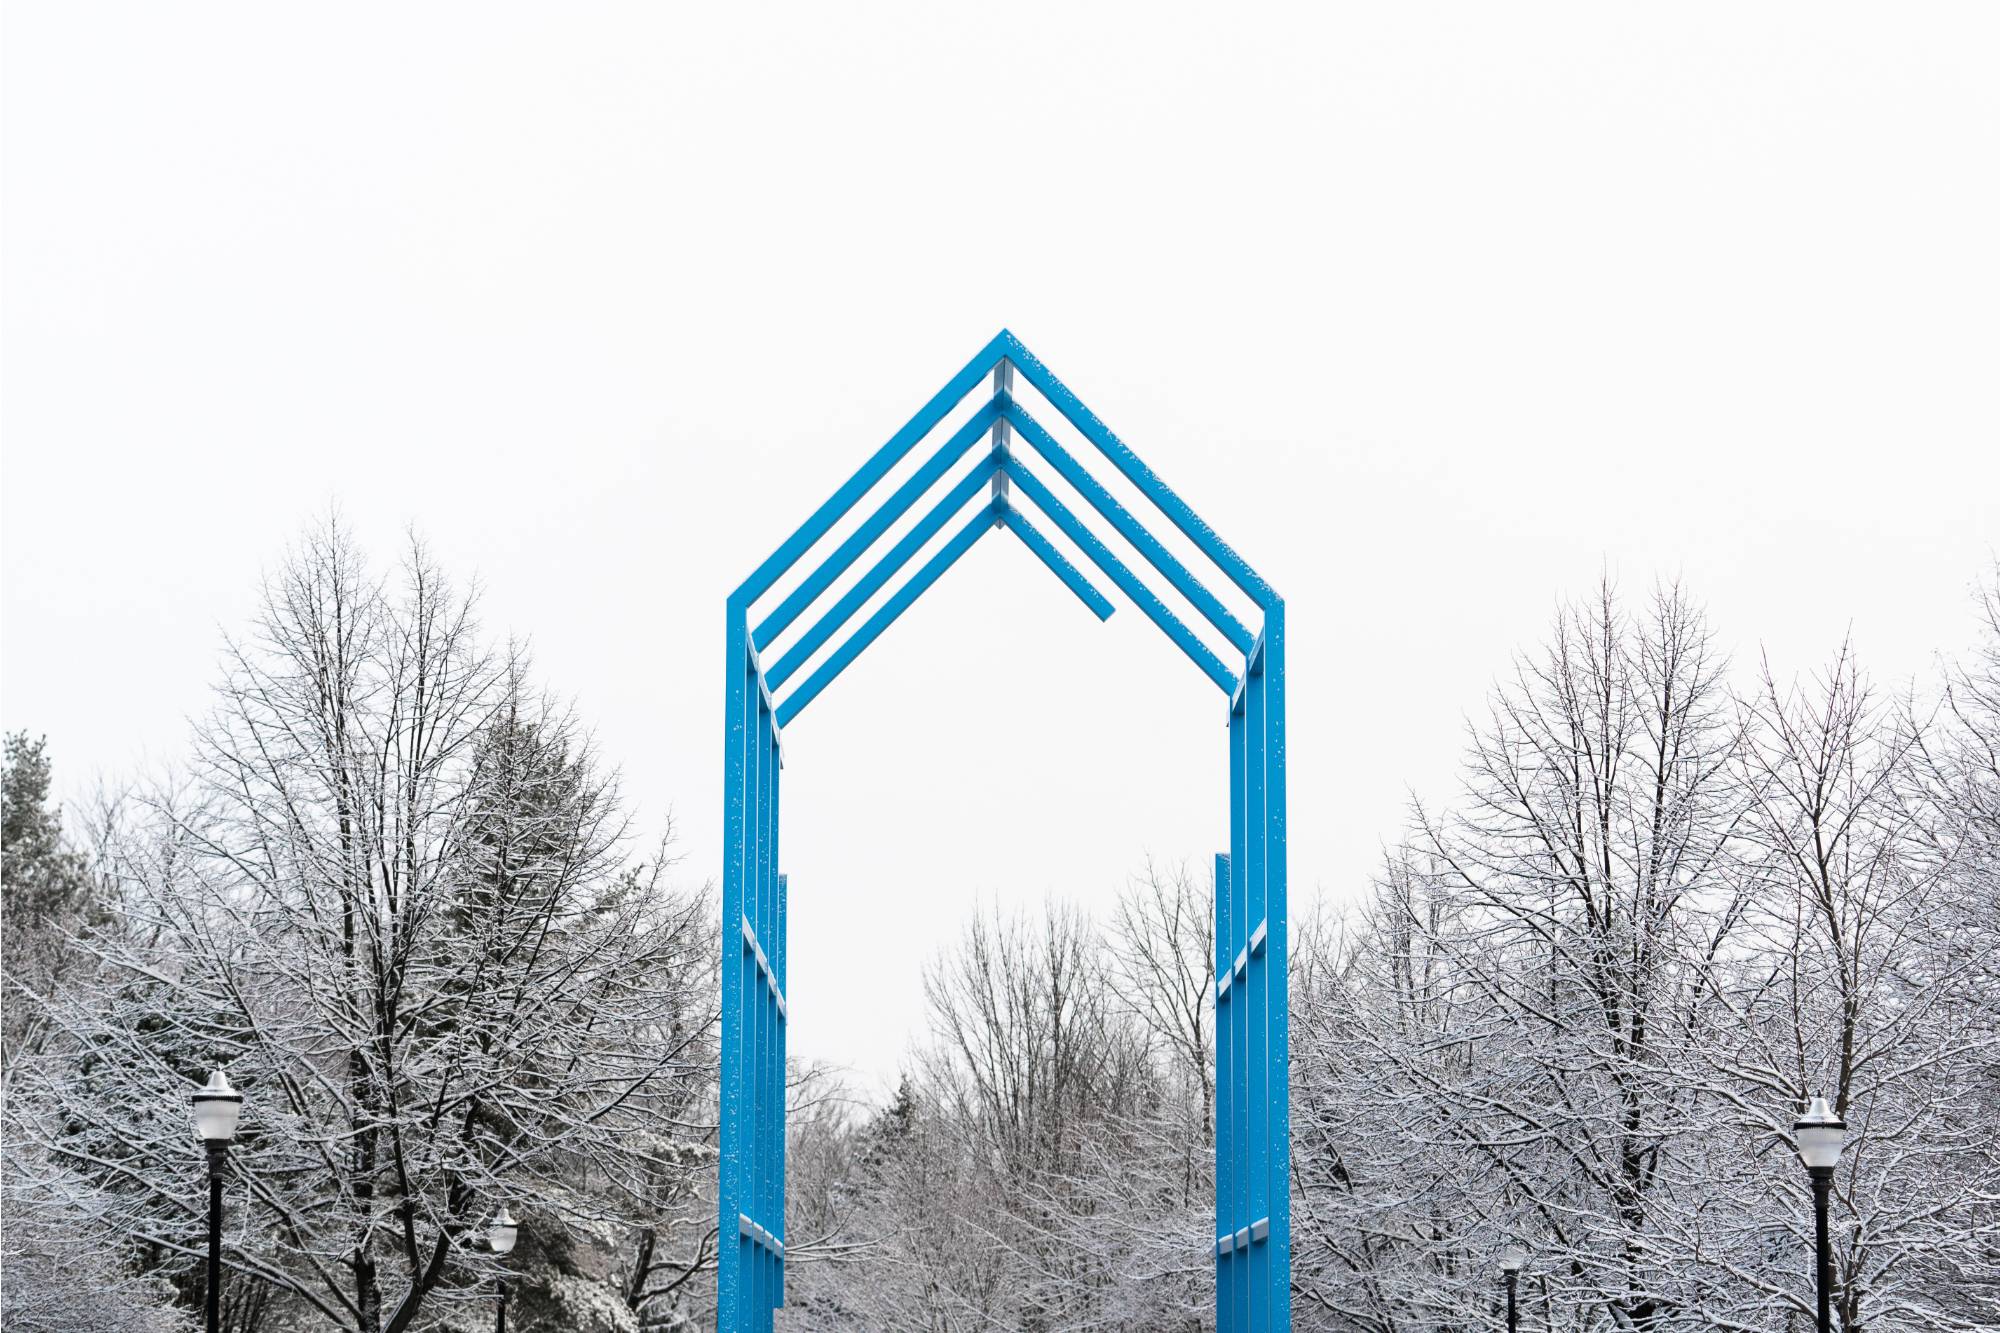 The blue Transformational Link on GVSU's Allendale Campus in the winter with snow on the ground